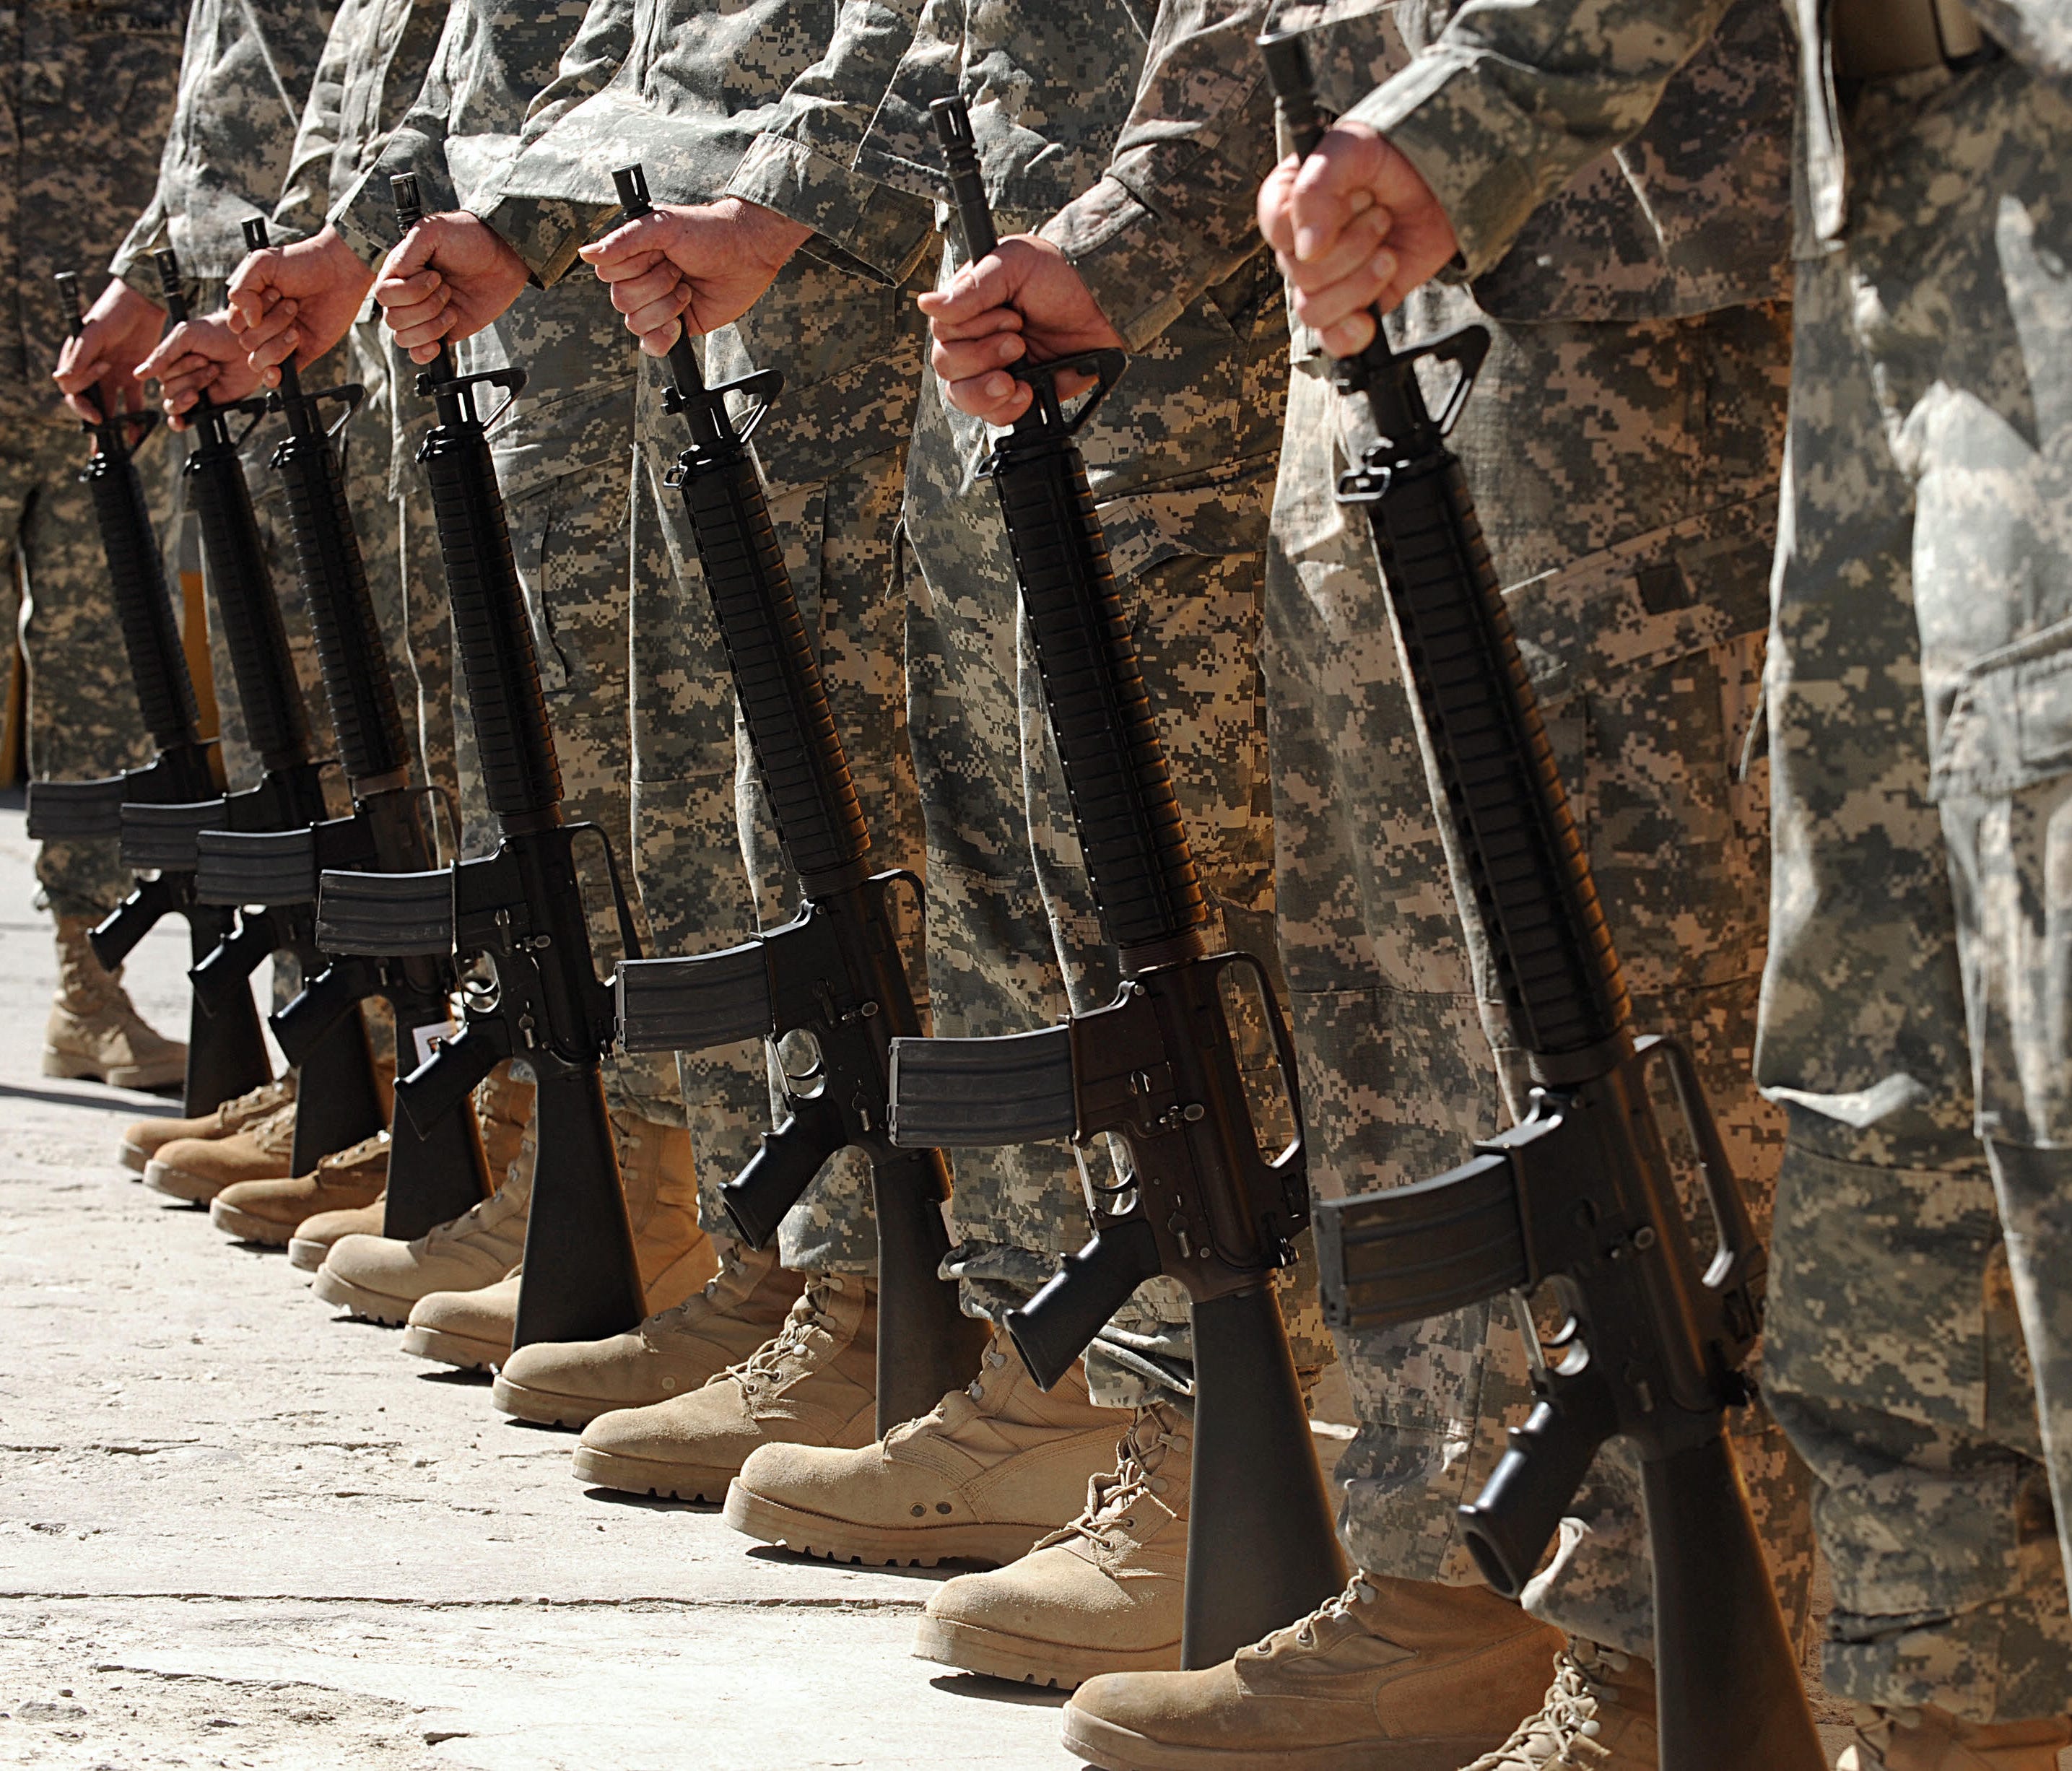 In this file photo, US soldiers stand at attention during a ceremony at Bagram air base.